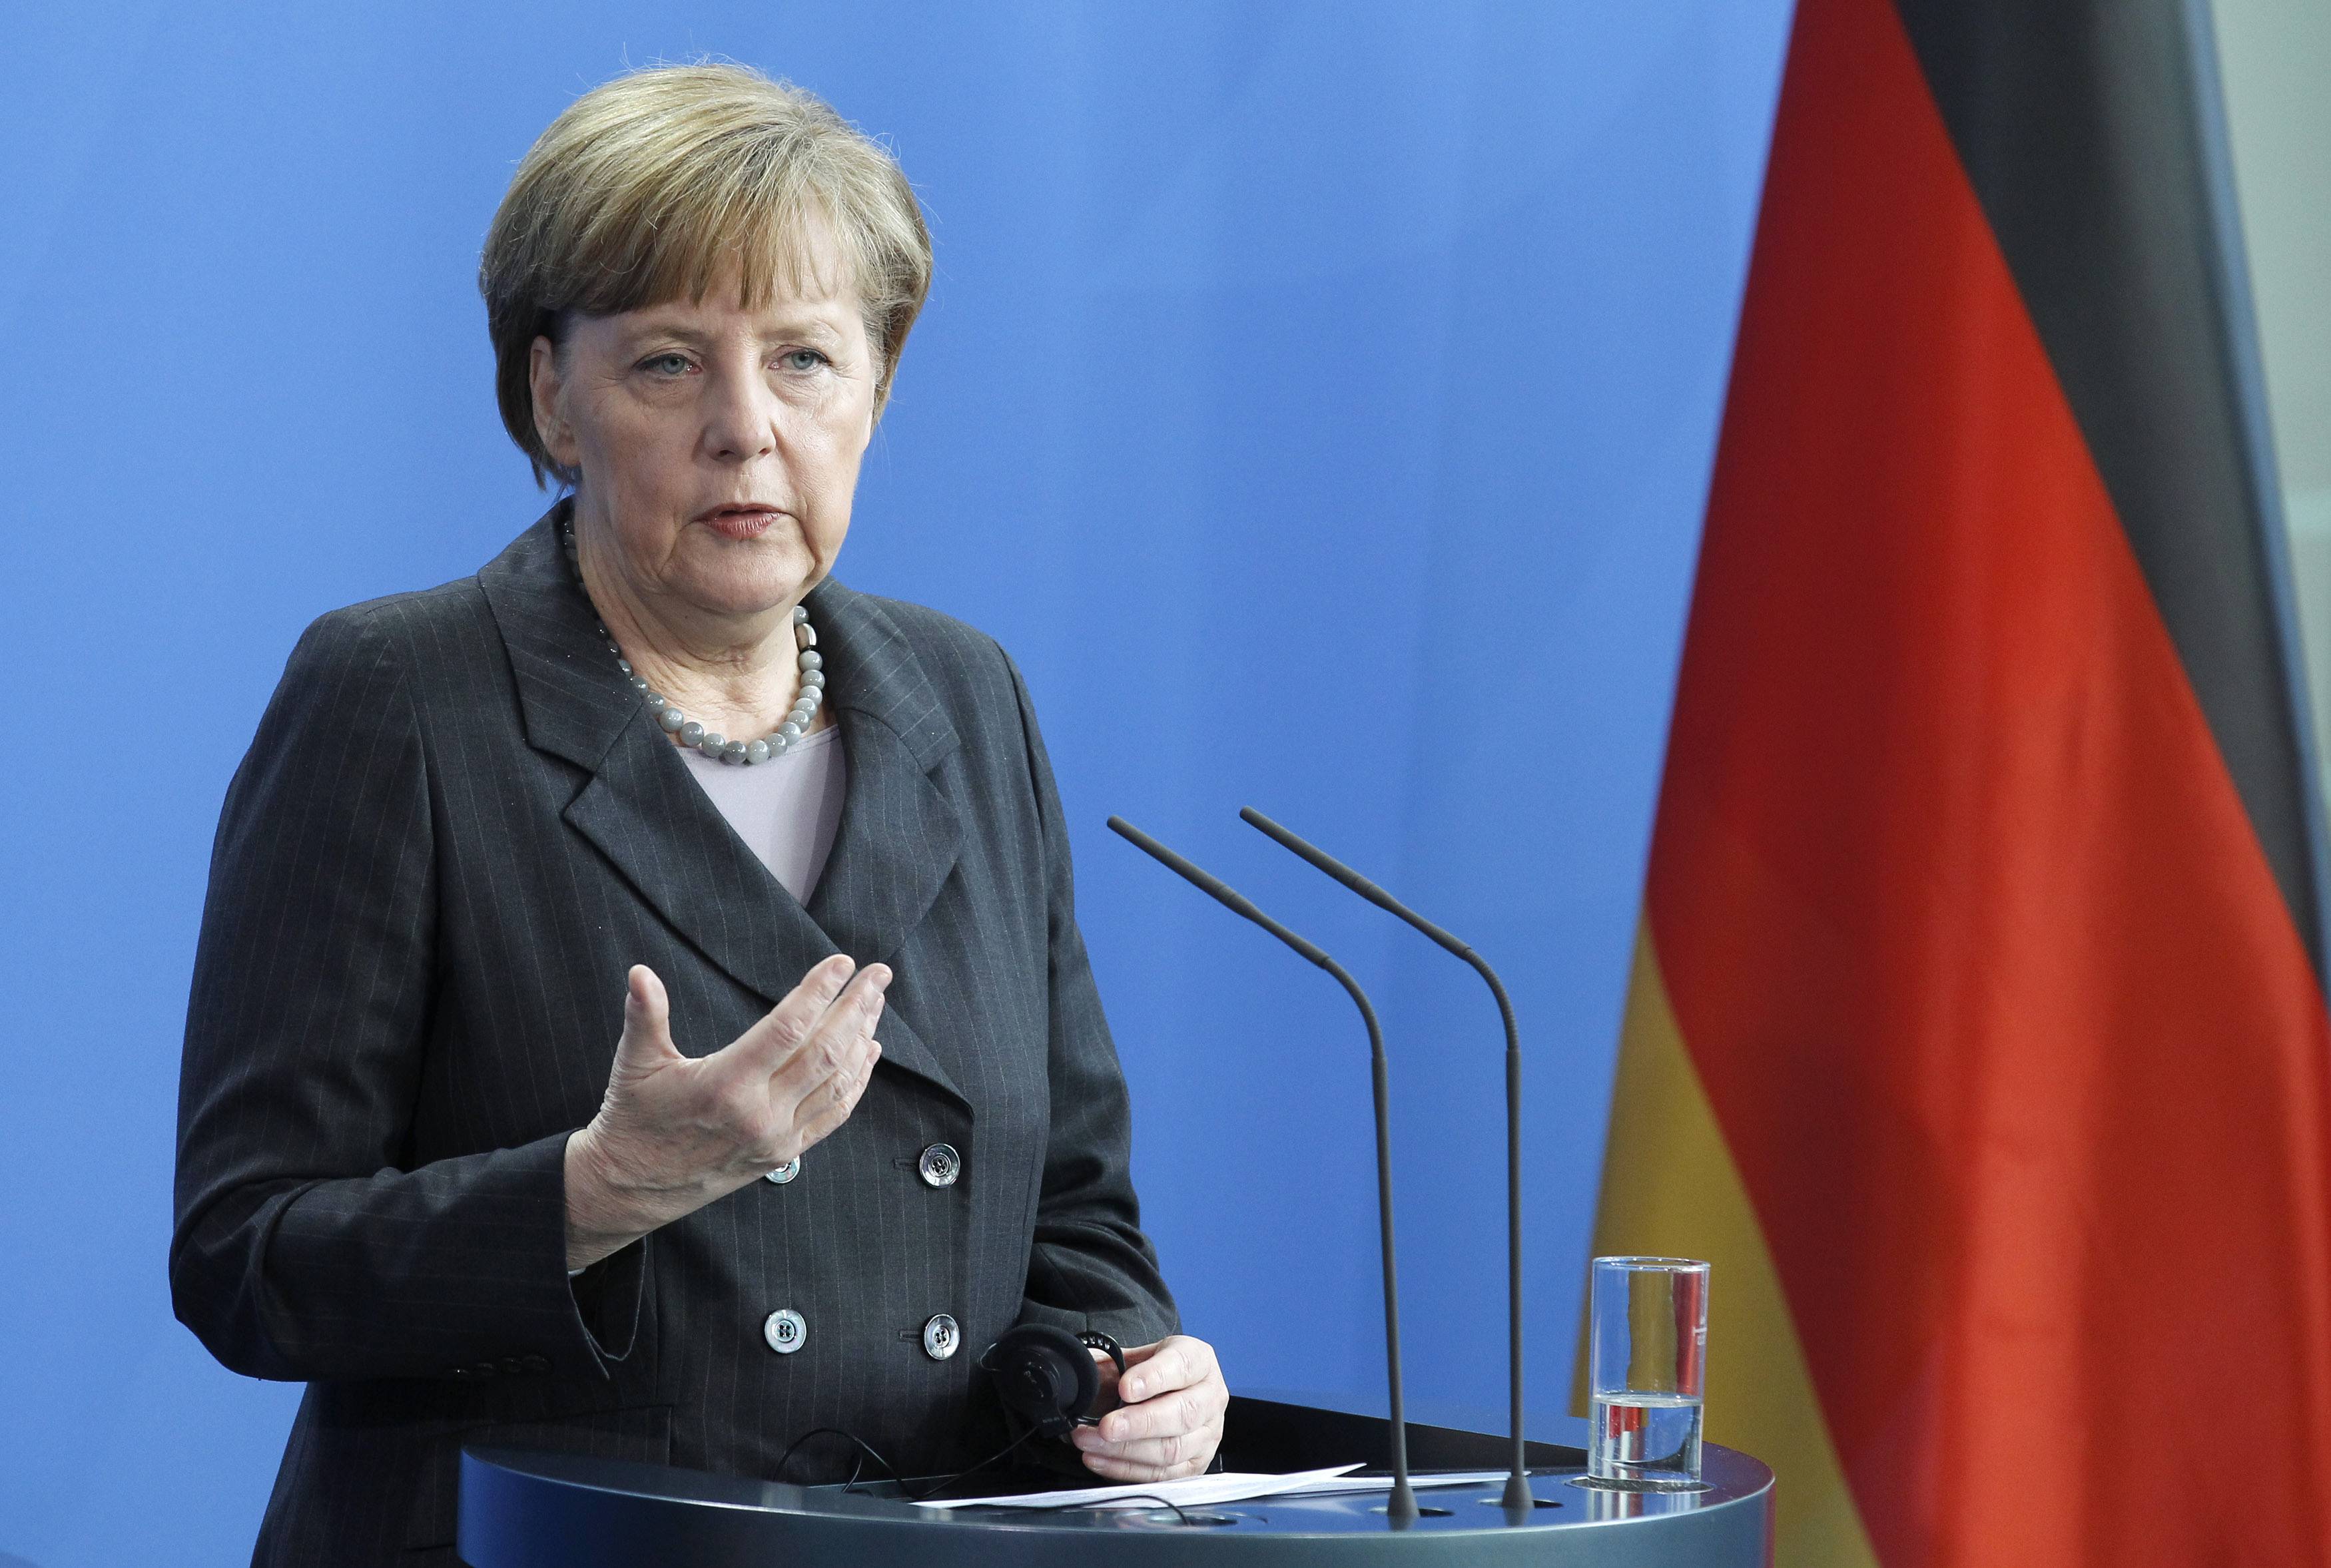 German Chancellor Angela Merkel addresses the media after talks with Czech Republic's Prime Minister Bohuslav Sobotka in Berlin March 13, 2014.   REUTERS/Tobias Schwarz   (GERMANY - Tags: POLITICS)